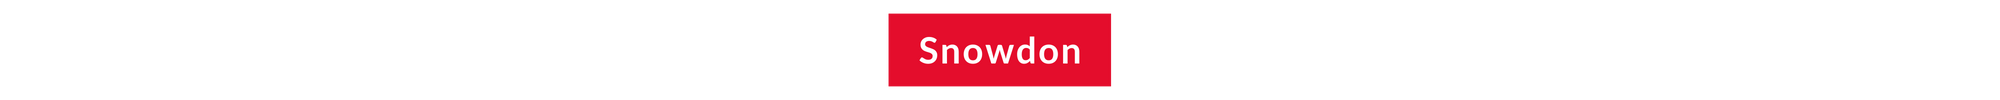 The word Snowdon in a red block